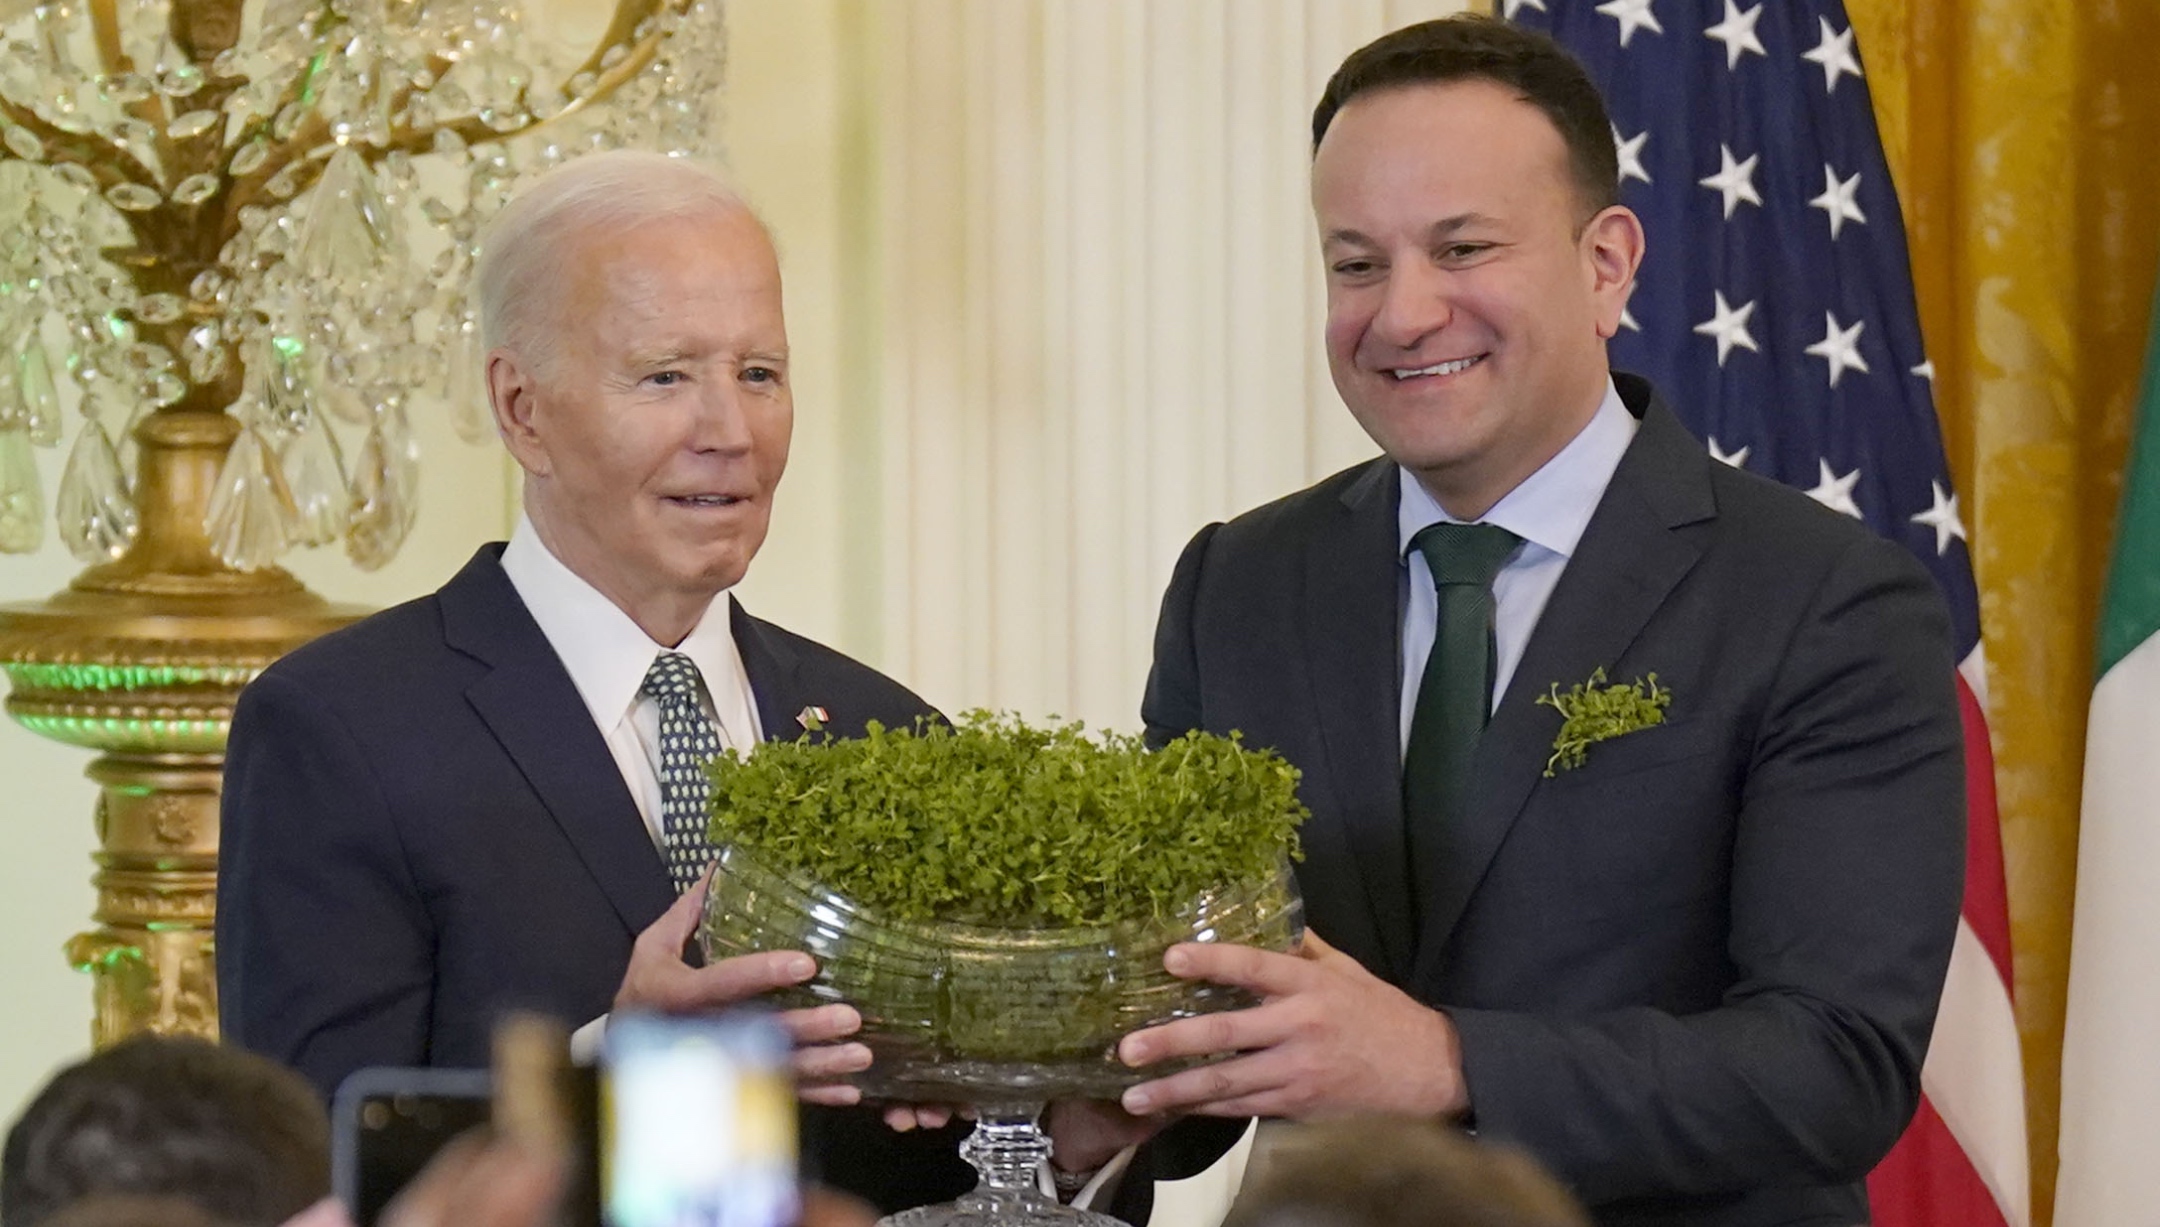 Taoiseach Leo Varadkar and US President Joe Biden during the St Patrick’s Day Reception and Shamrock Ceremony in the the East Room of the White House, March 17, 2024. (Niall Carson/PA Images via Getty Images)